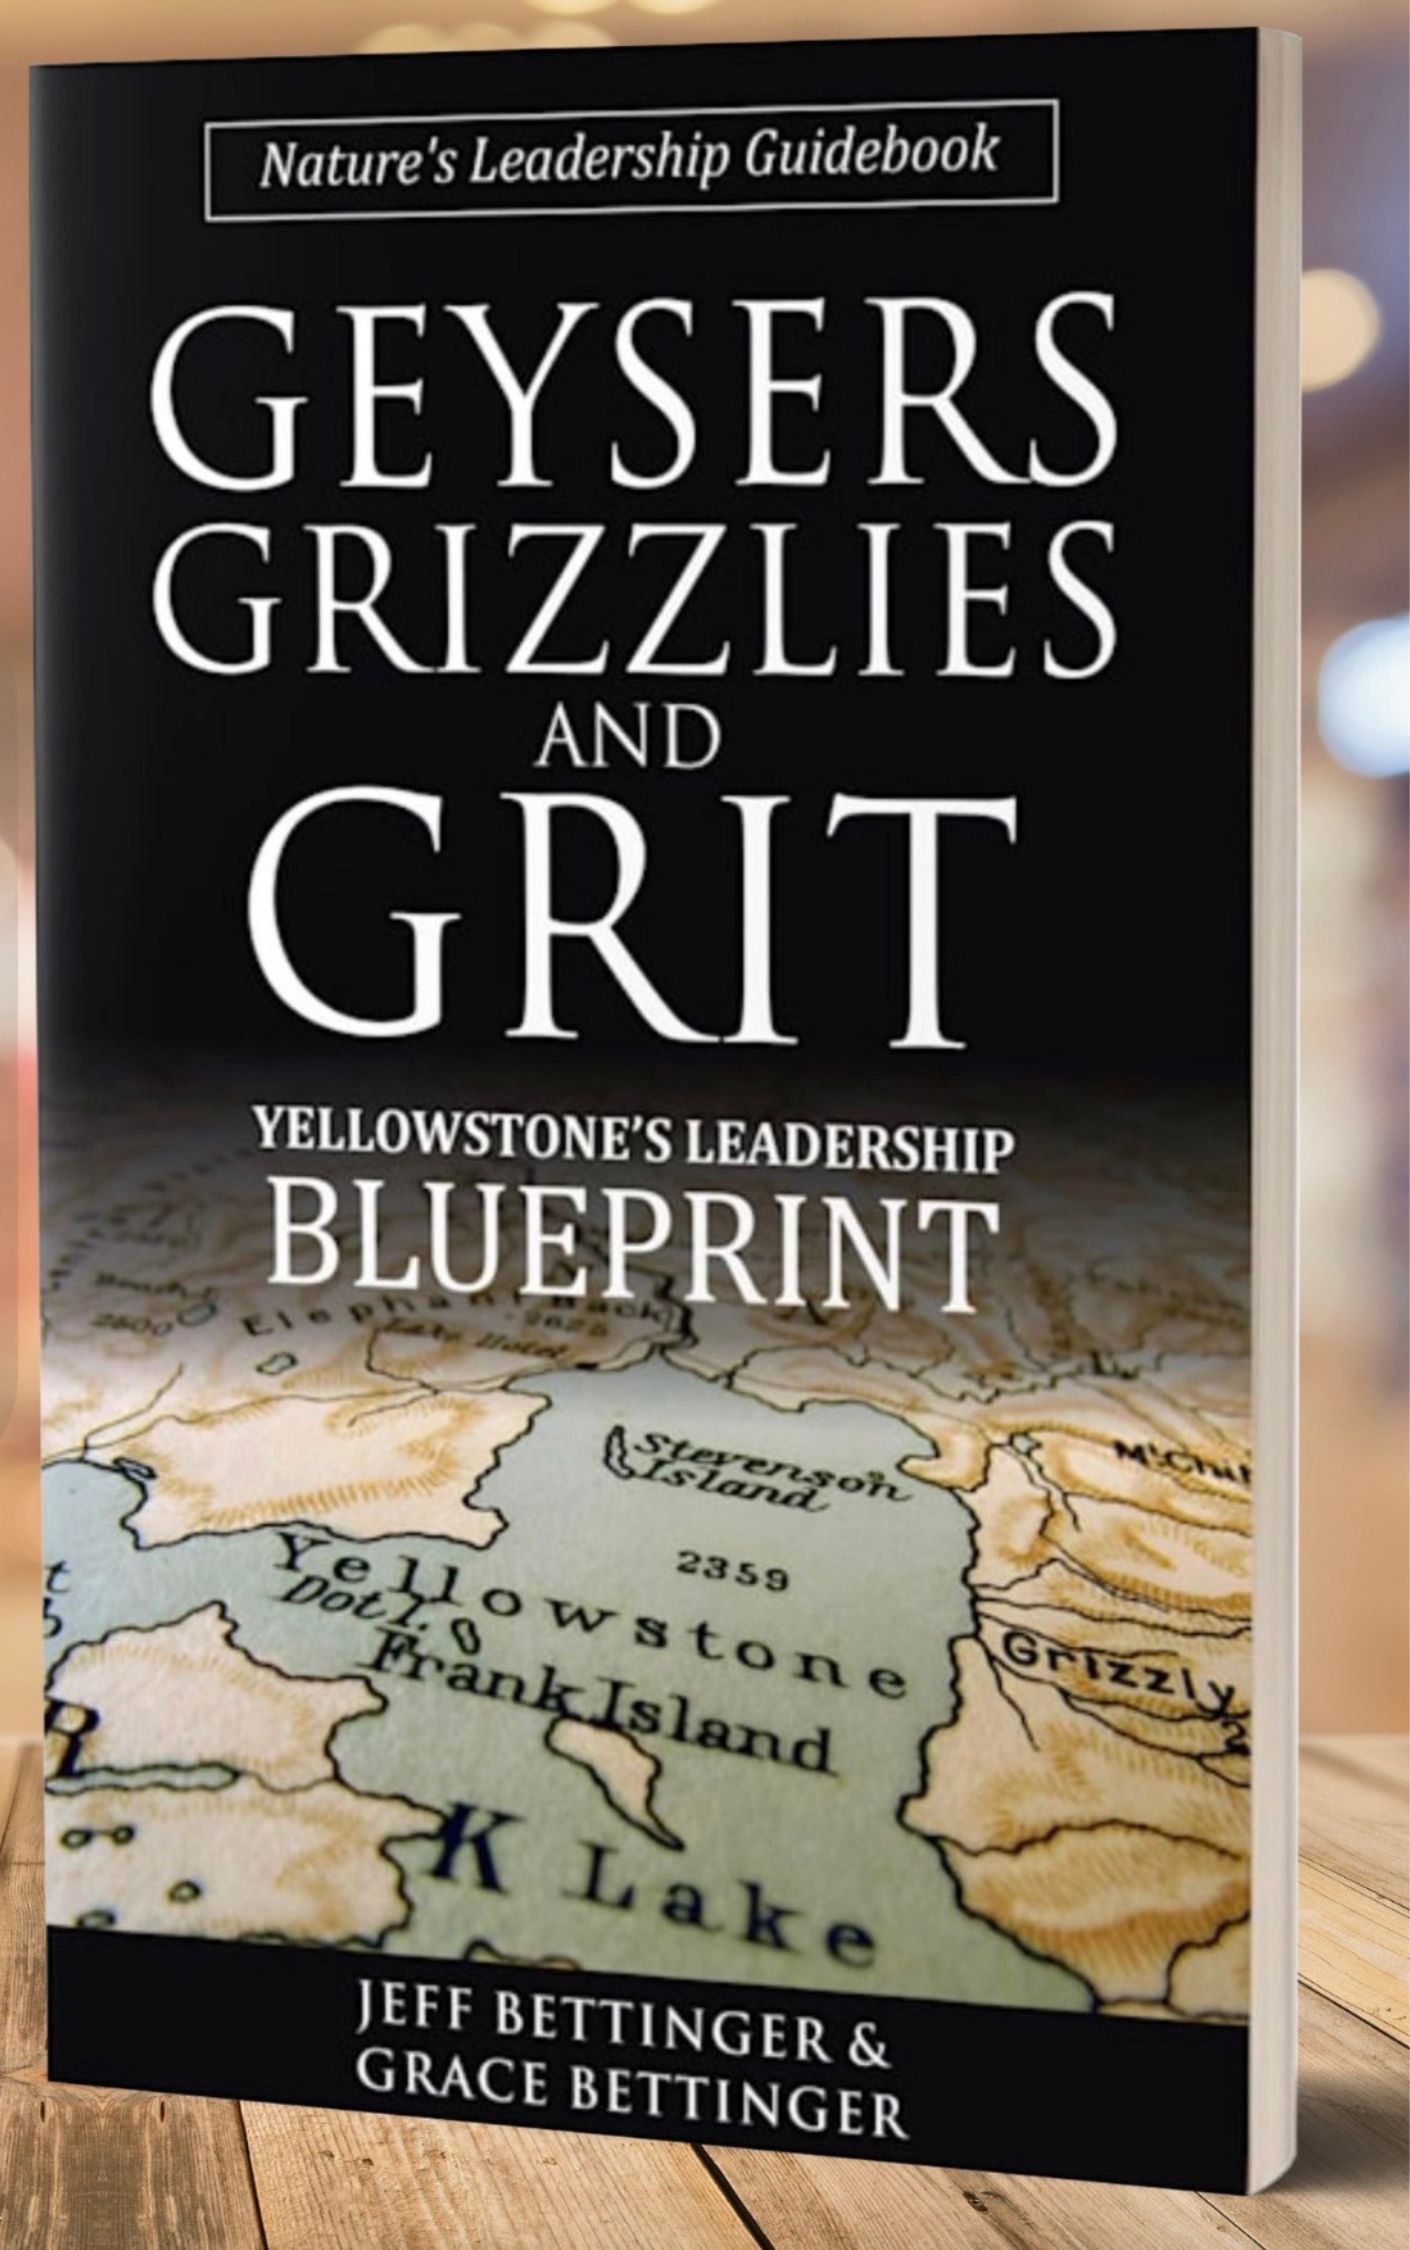 Jeff and Grace Bettinger Launch Interactive Leadership Workshops Following Success of "Geysers, Grizzlies and Grit"